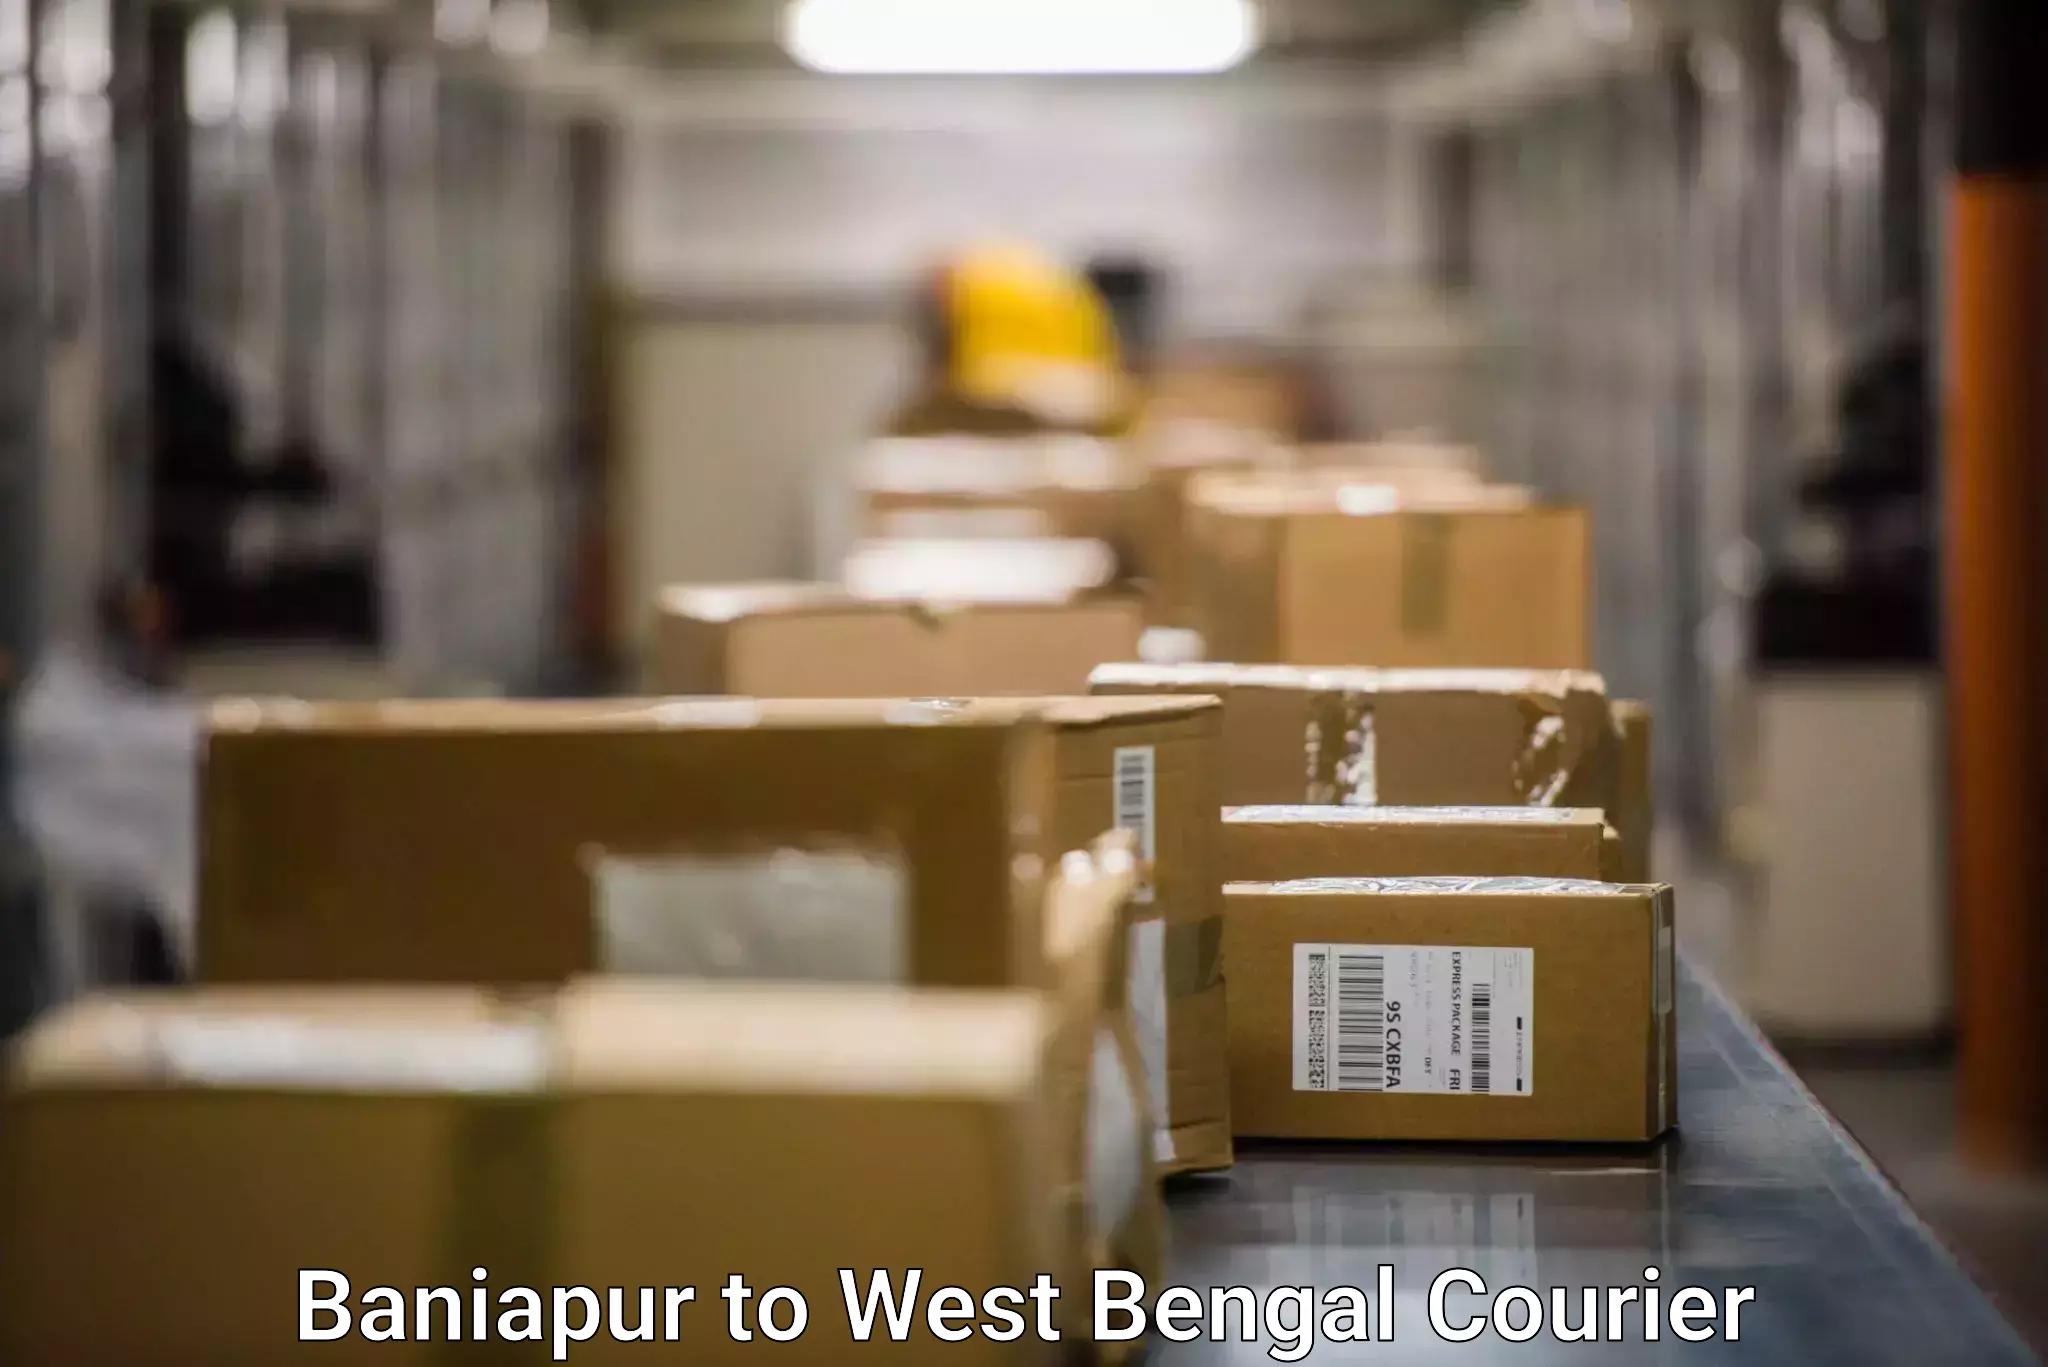 State-of-the-art courier technology Baniapur to Panjipara